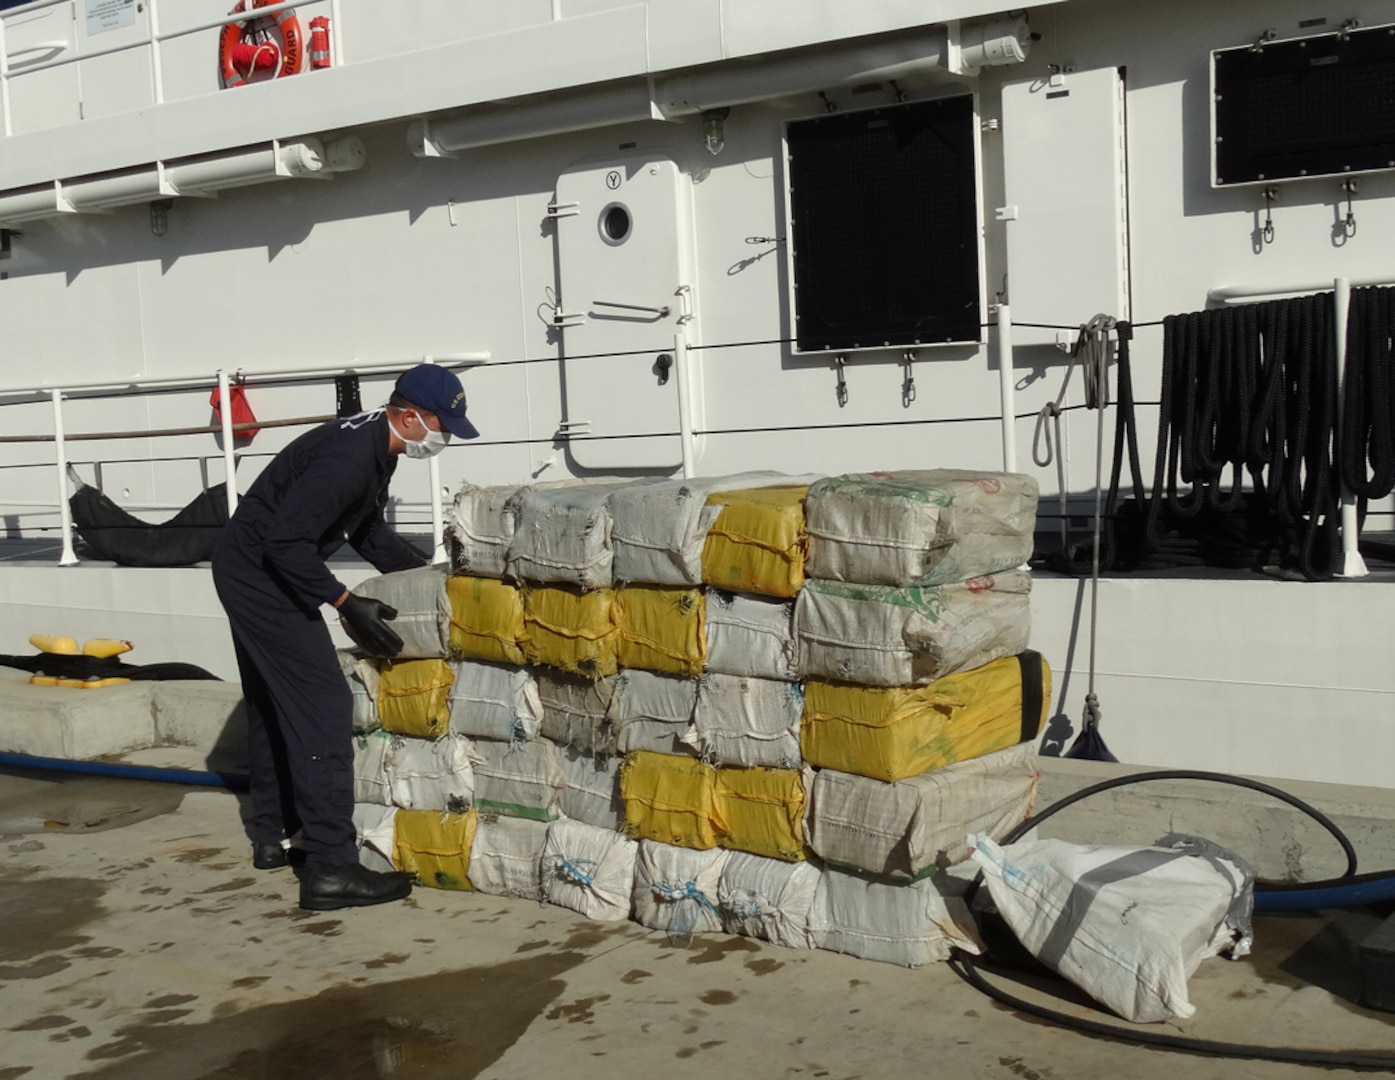 The Coast Guard transferred custody of four suspected smugglers and multiple bales of cocaine to U.S. federal law enforcement authorities at Coast Guard Sector San Juan, Puerto Rico Jan. 8, 2017. In total, 2,000 pounds of cocaine with an estimated wholesale value of $30 million were seized as a result of multi-agency law enforcement efforts in support of Operation Unified Resolve and Operation Caribbean Guard. (U.S. Coast Guard photo)